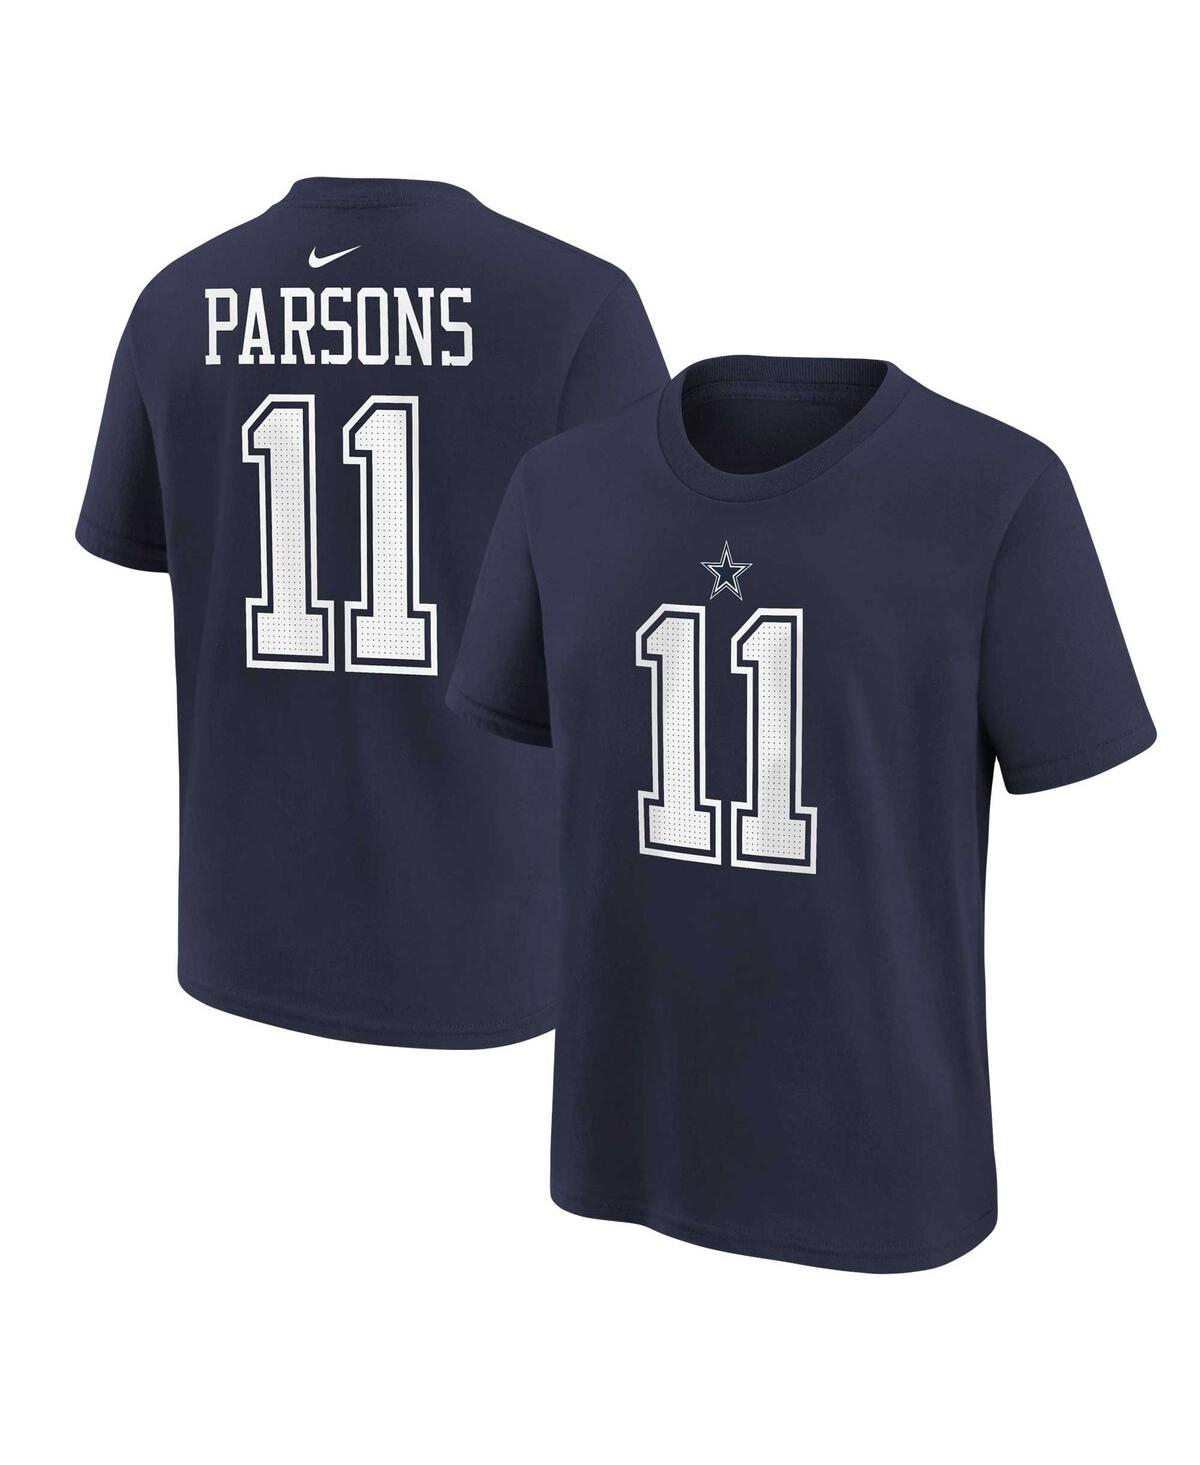 Nike Babies' Preschool Boys And Girls  Micah Parsons Navy Dallas Cowboys Player Name And Number T-shirt